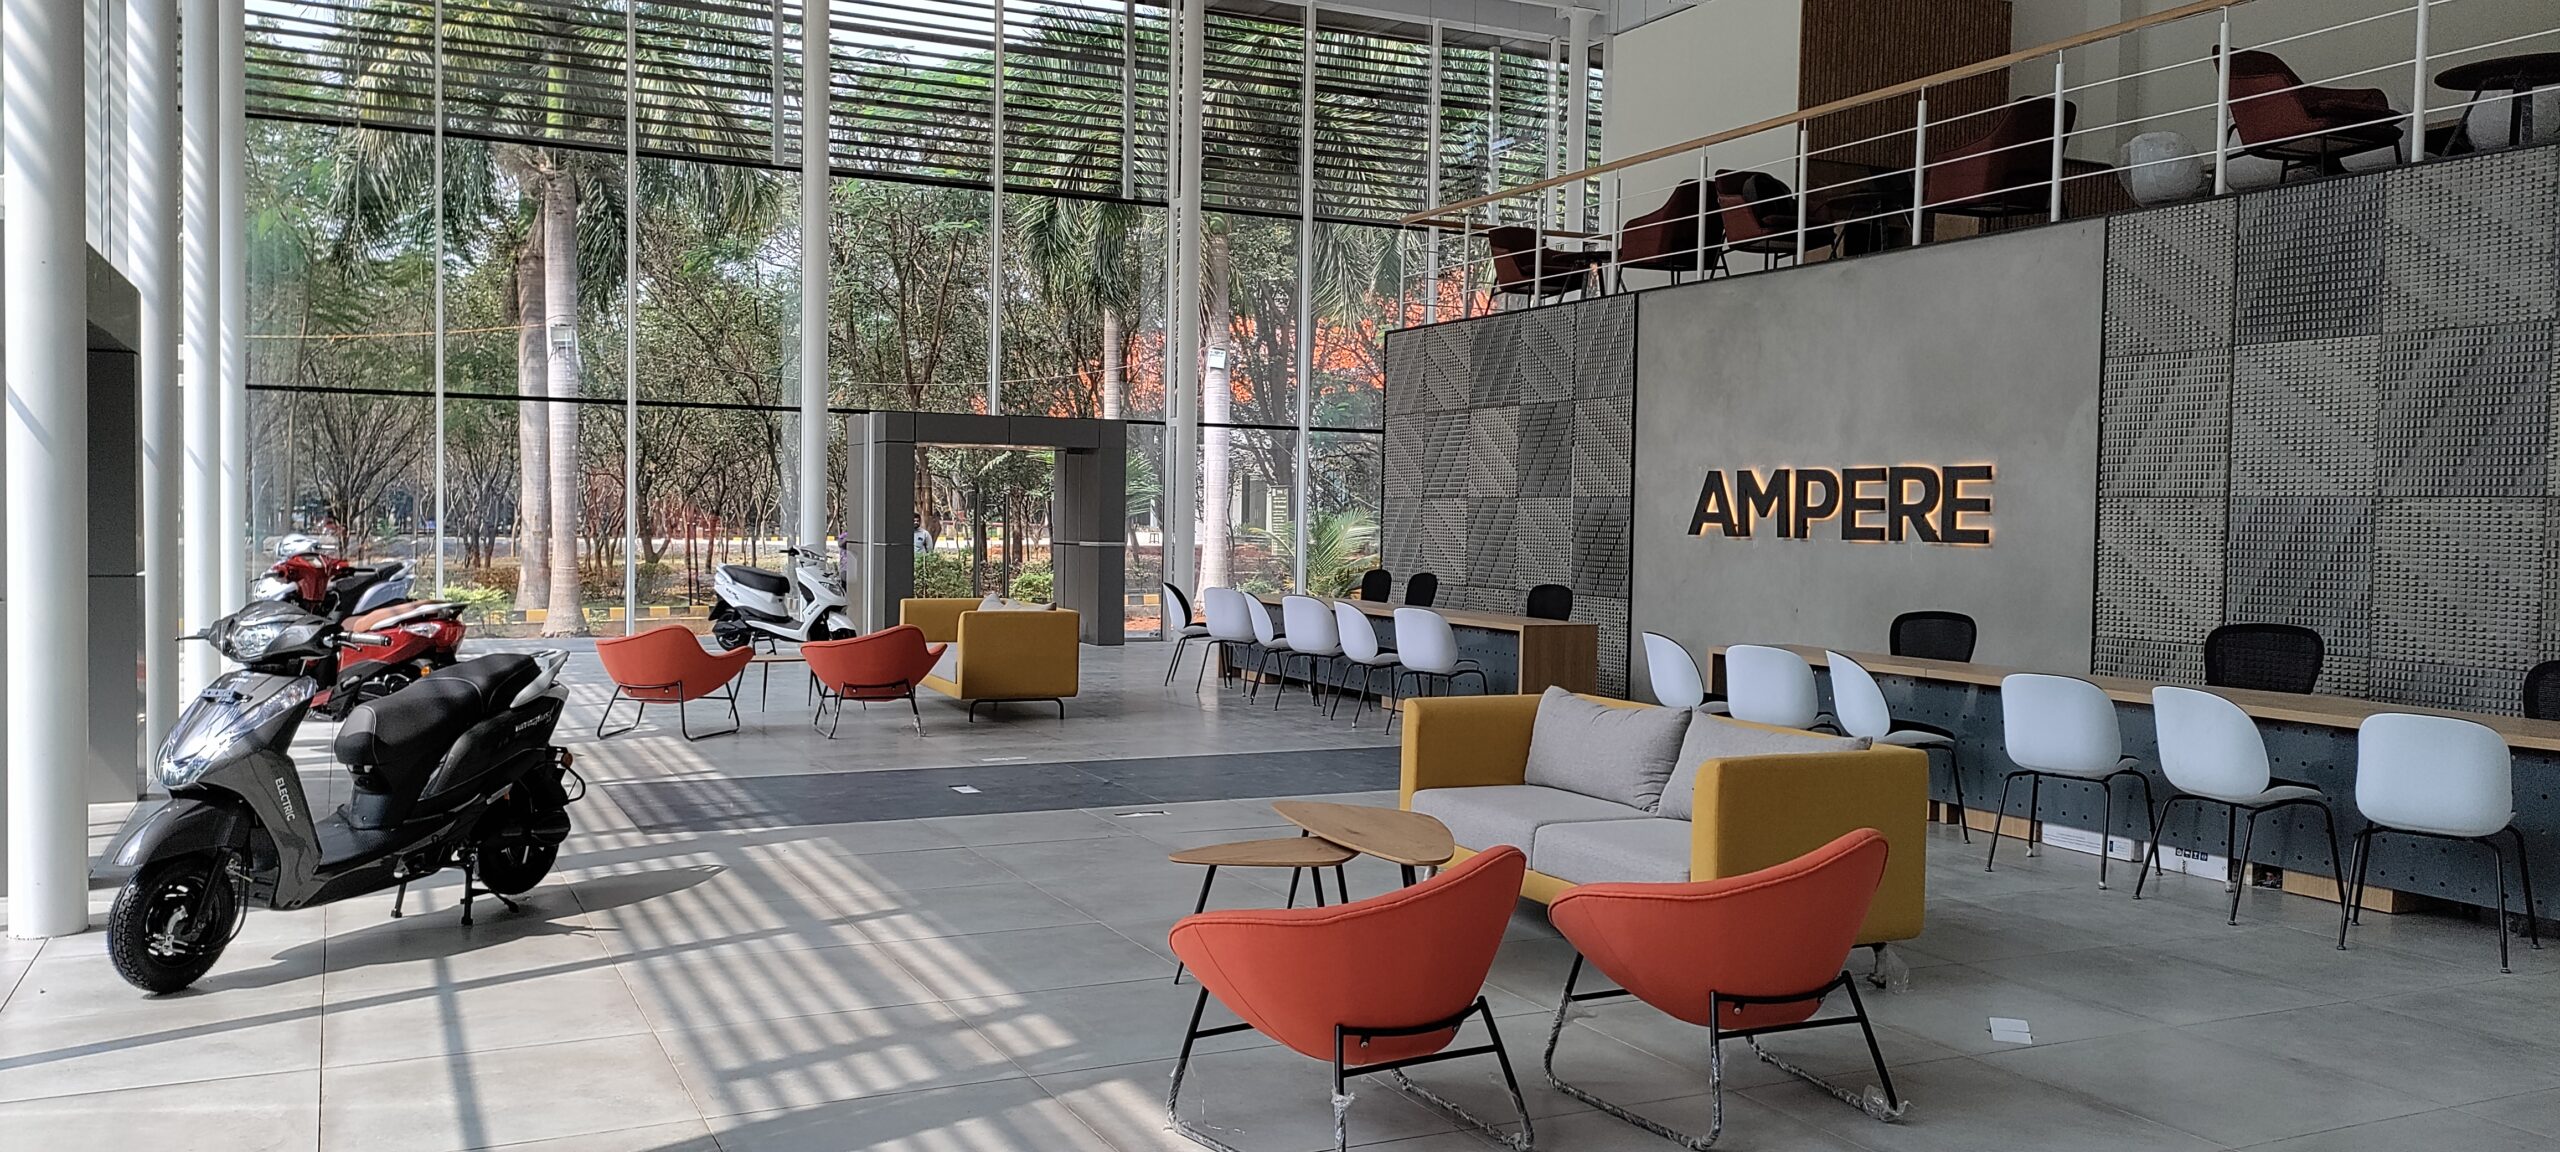 First Ampere Experience Centre Opens In Ranipet, Tamil Nadu! (2)